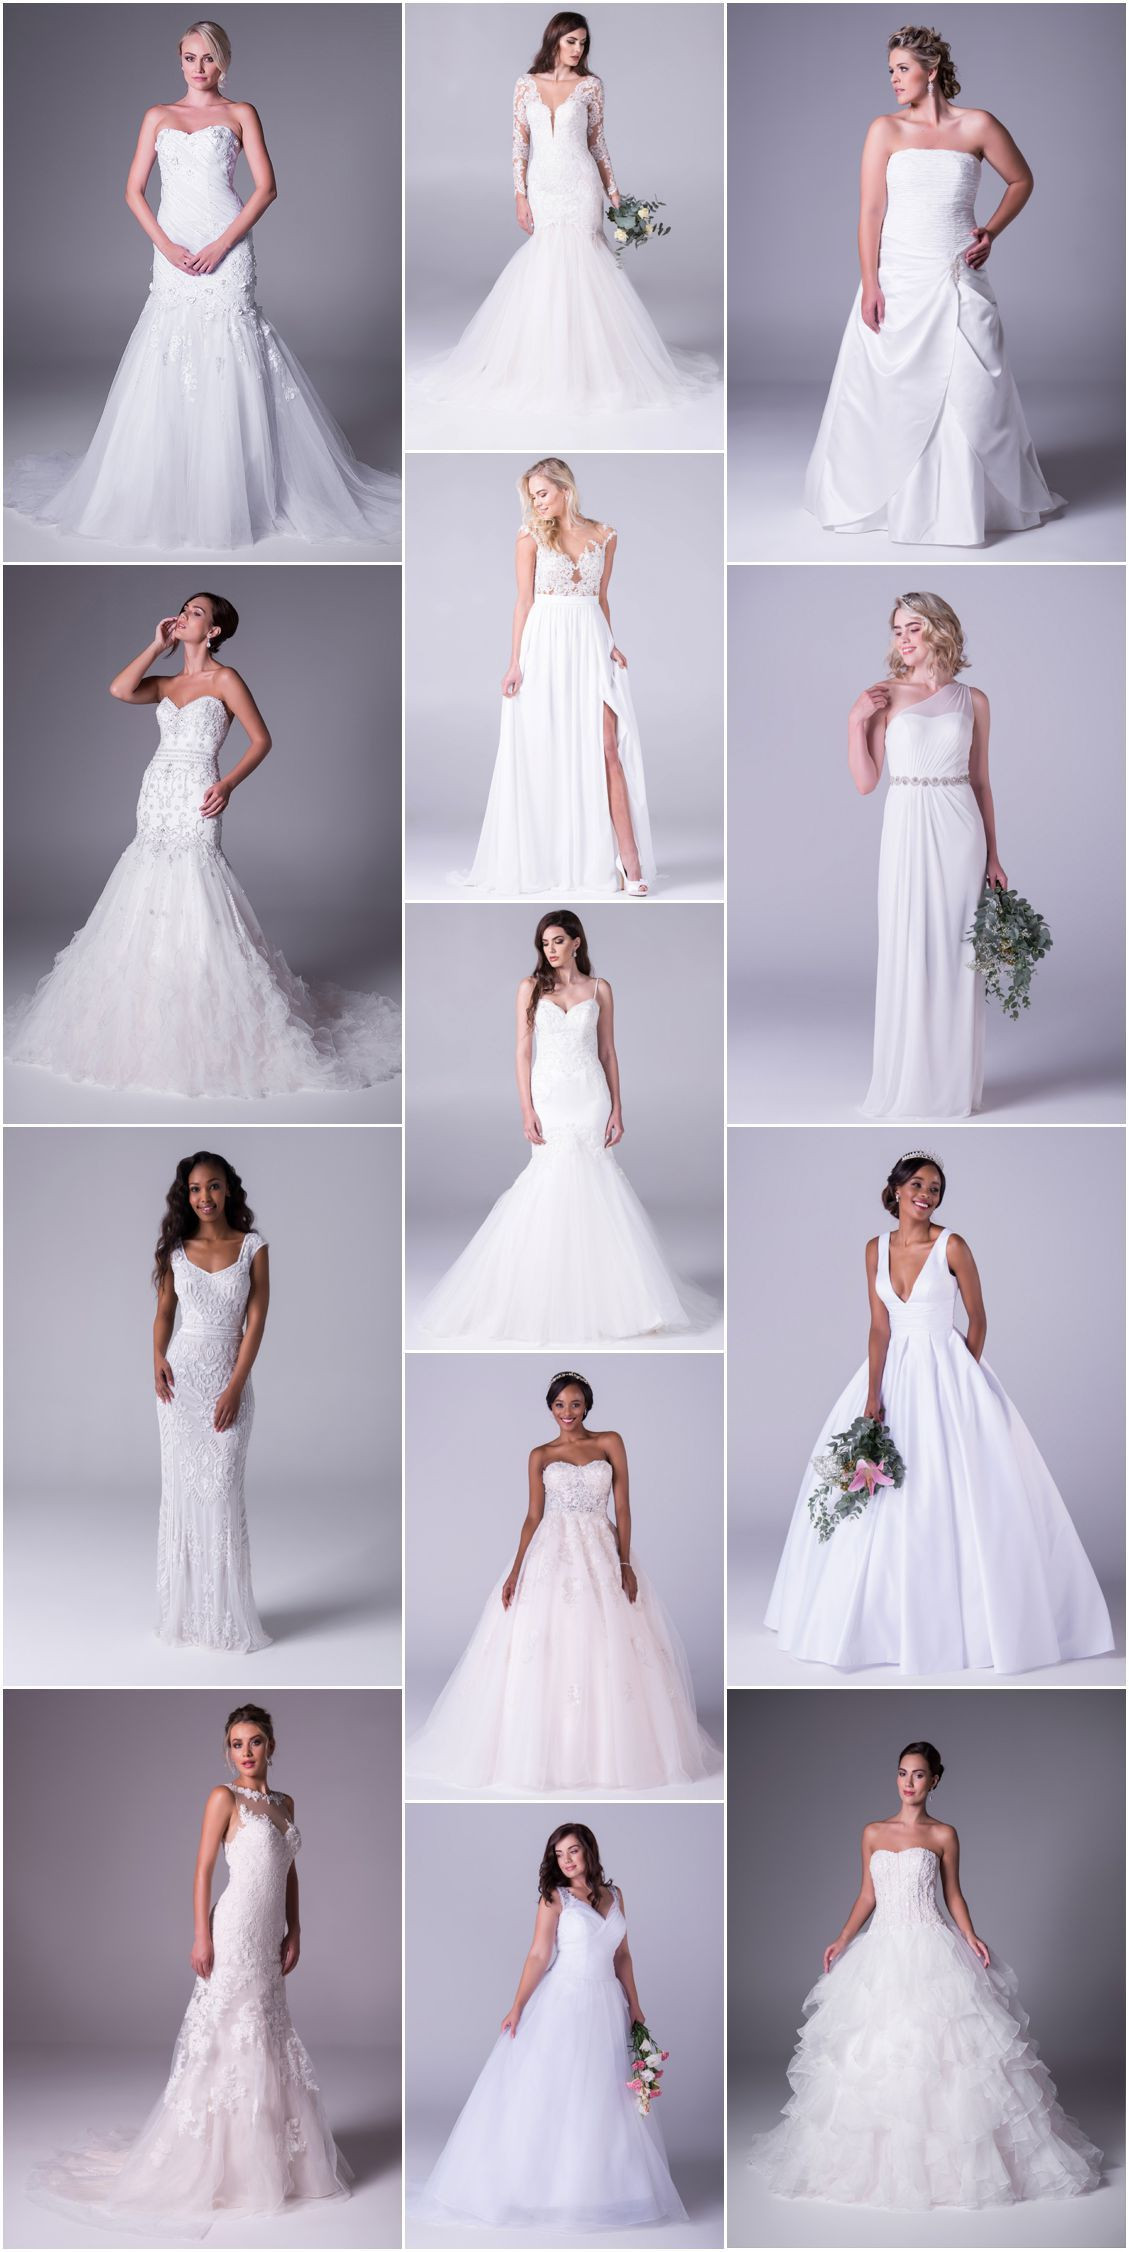 Wedding Dresses For Body Type
 Best Wedding Gowns and Dresses for your Body Type